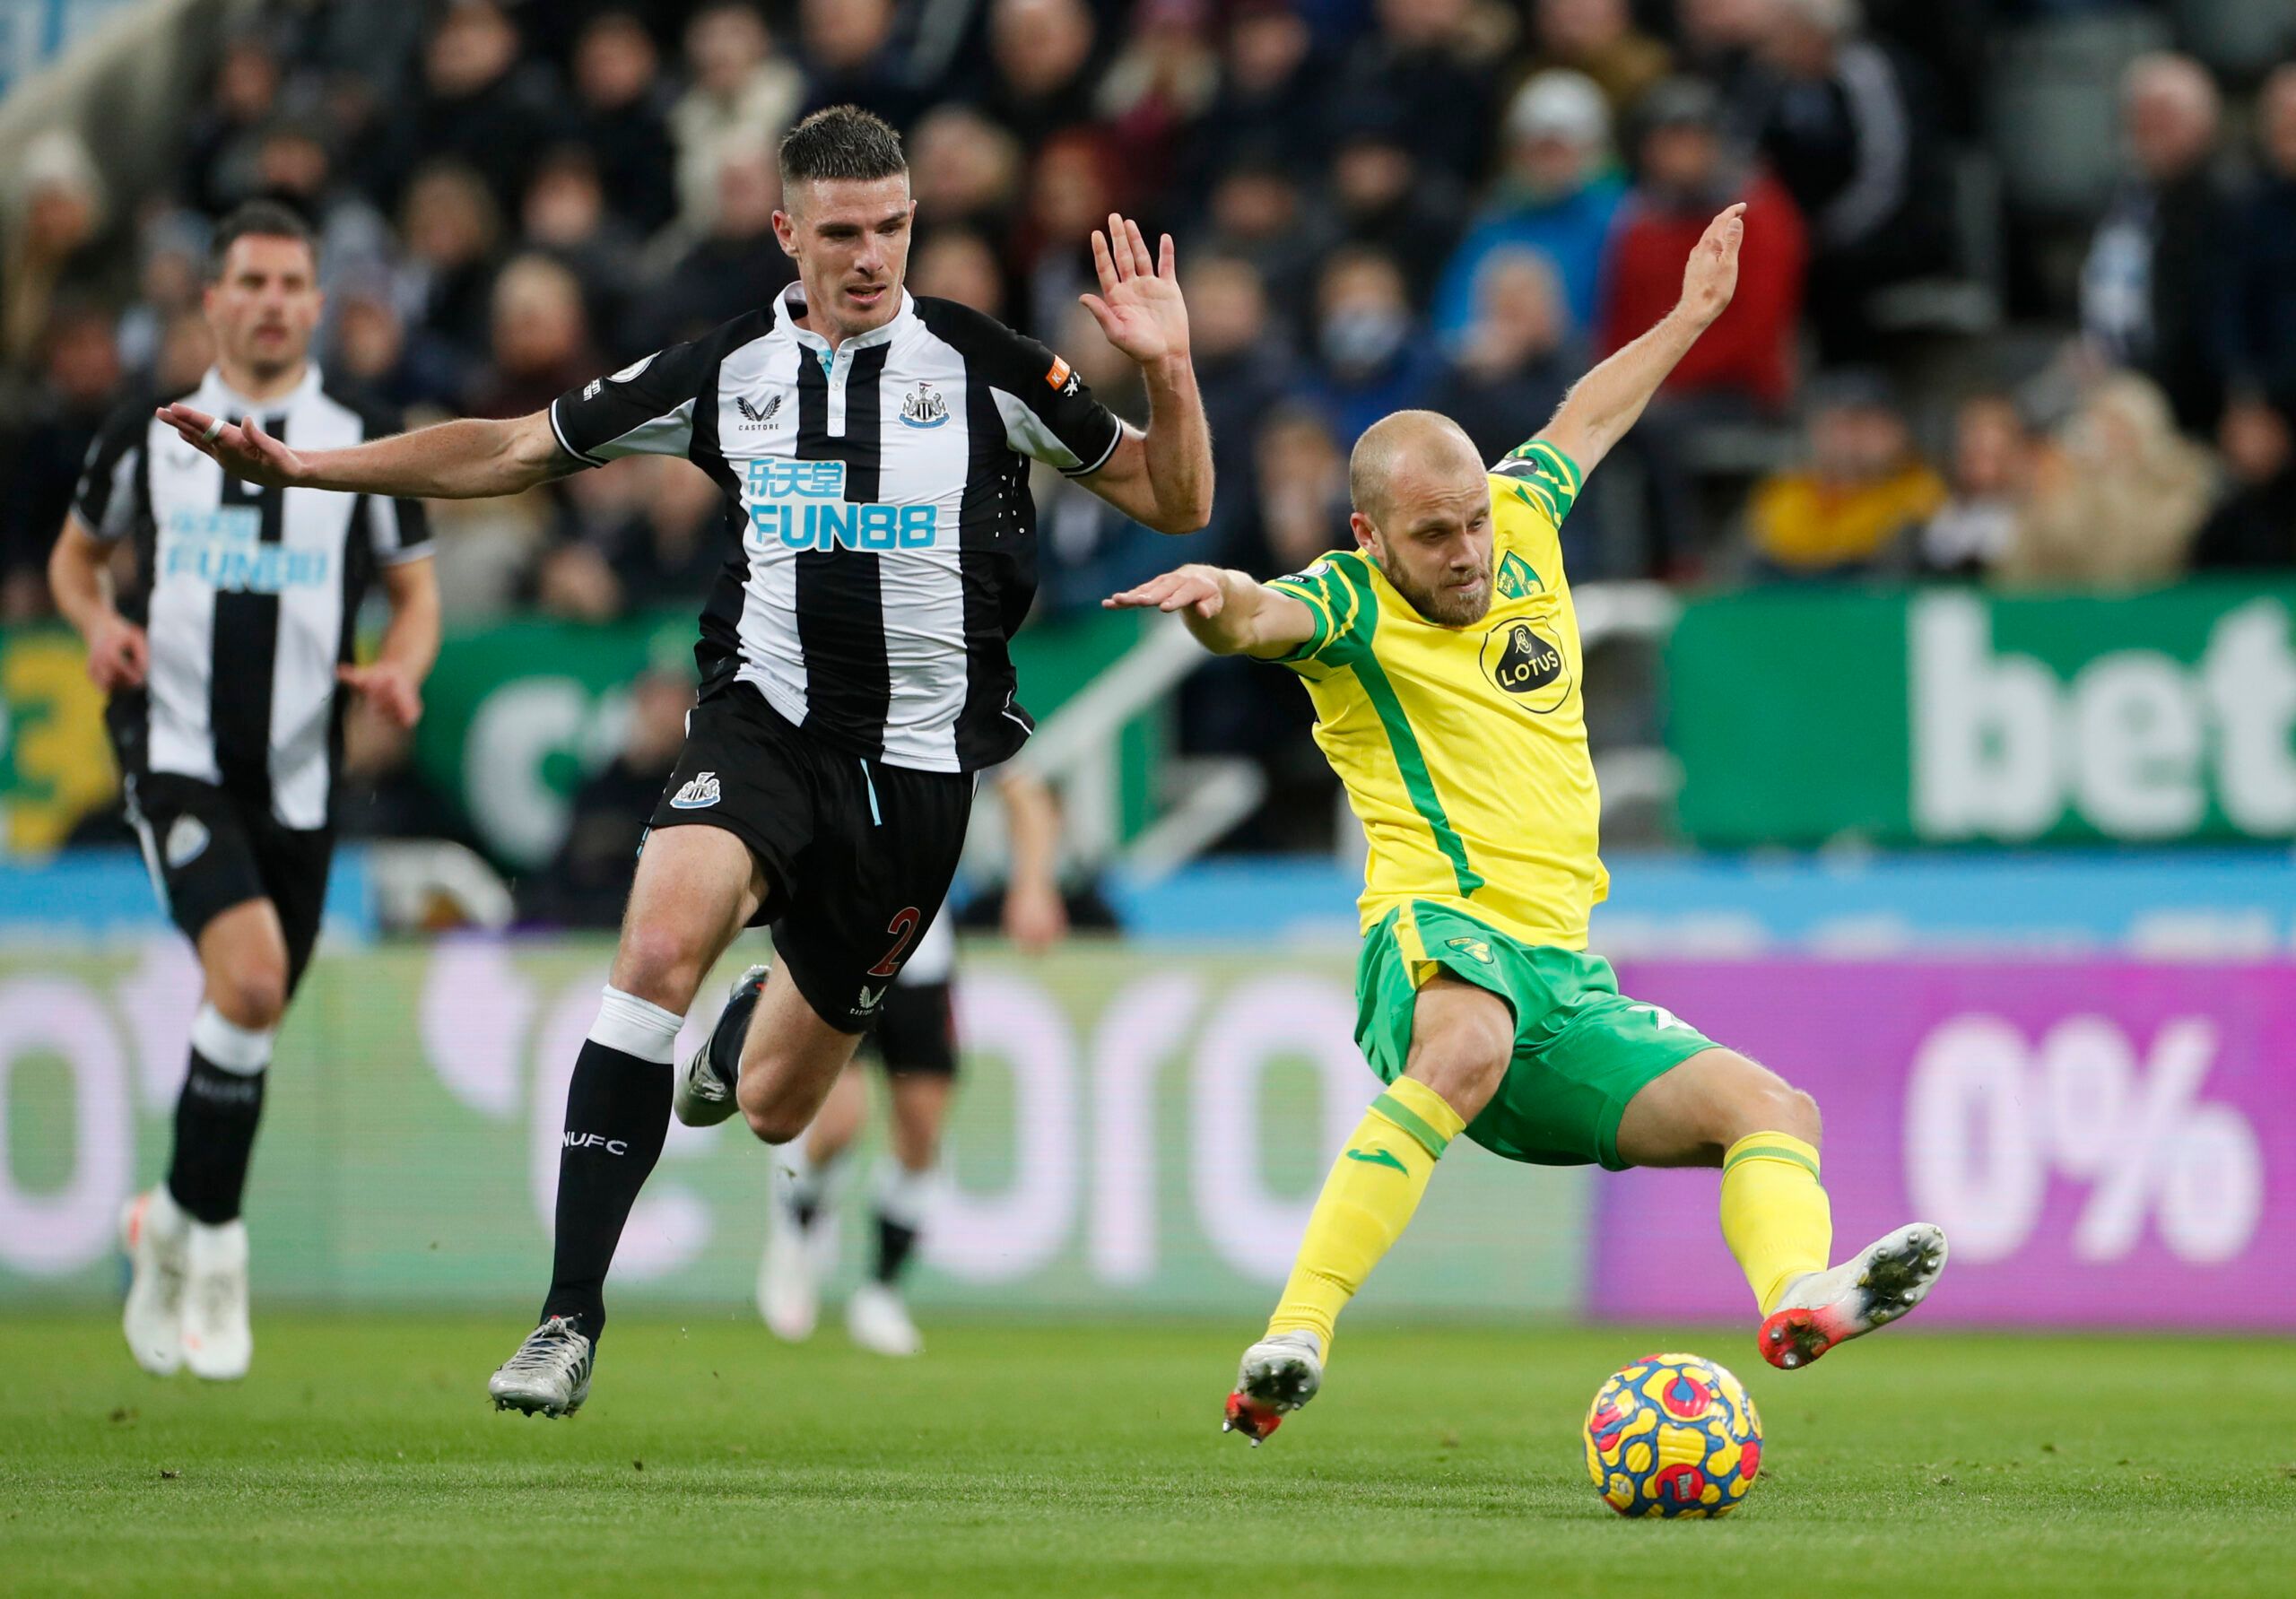 Soccer Football - Premier League - Newcastle United v Norwich City - St James' Park, Newcastle, Britain - November 30, 2021 Newcastle United's Ciaran Clark  fouls Norwich City's Teemu Pukki  and is later sent off Action Images via Reuters/Lee Smith EDITORIAL USE ONLY. No use with unauthorized audio, video, data, fixture lists, club/league logos or 'live' services. Online in-match use limited to 75 images, no video emulation. No use in betting, games or single club /league/player publications.  P